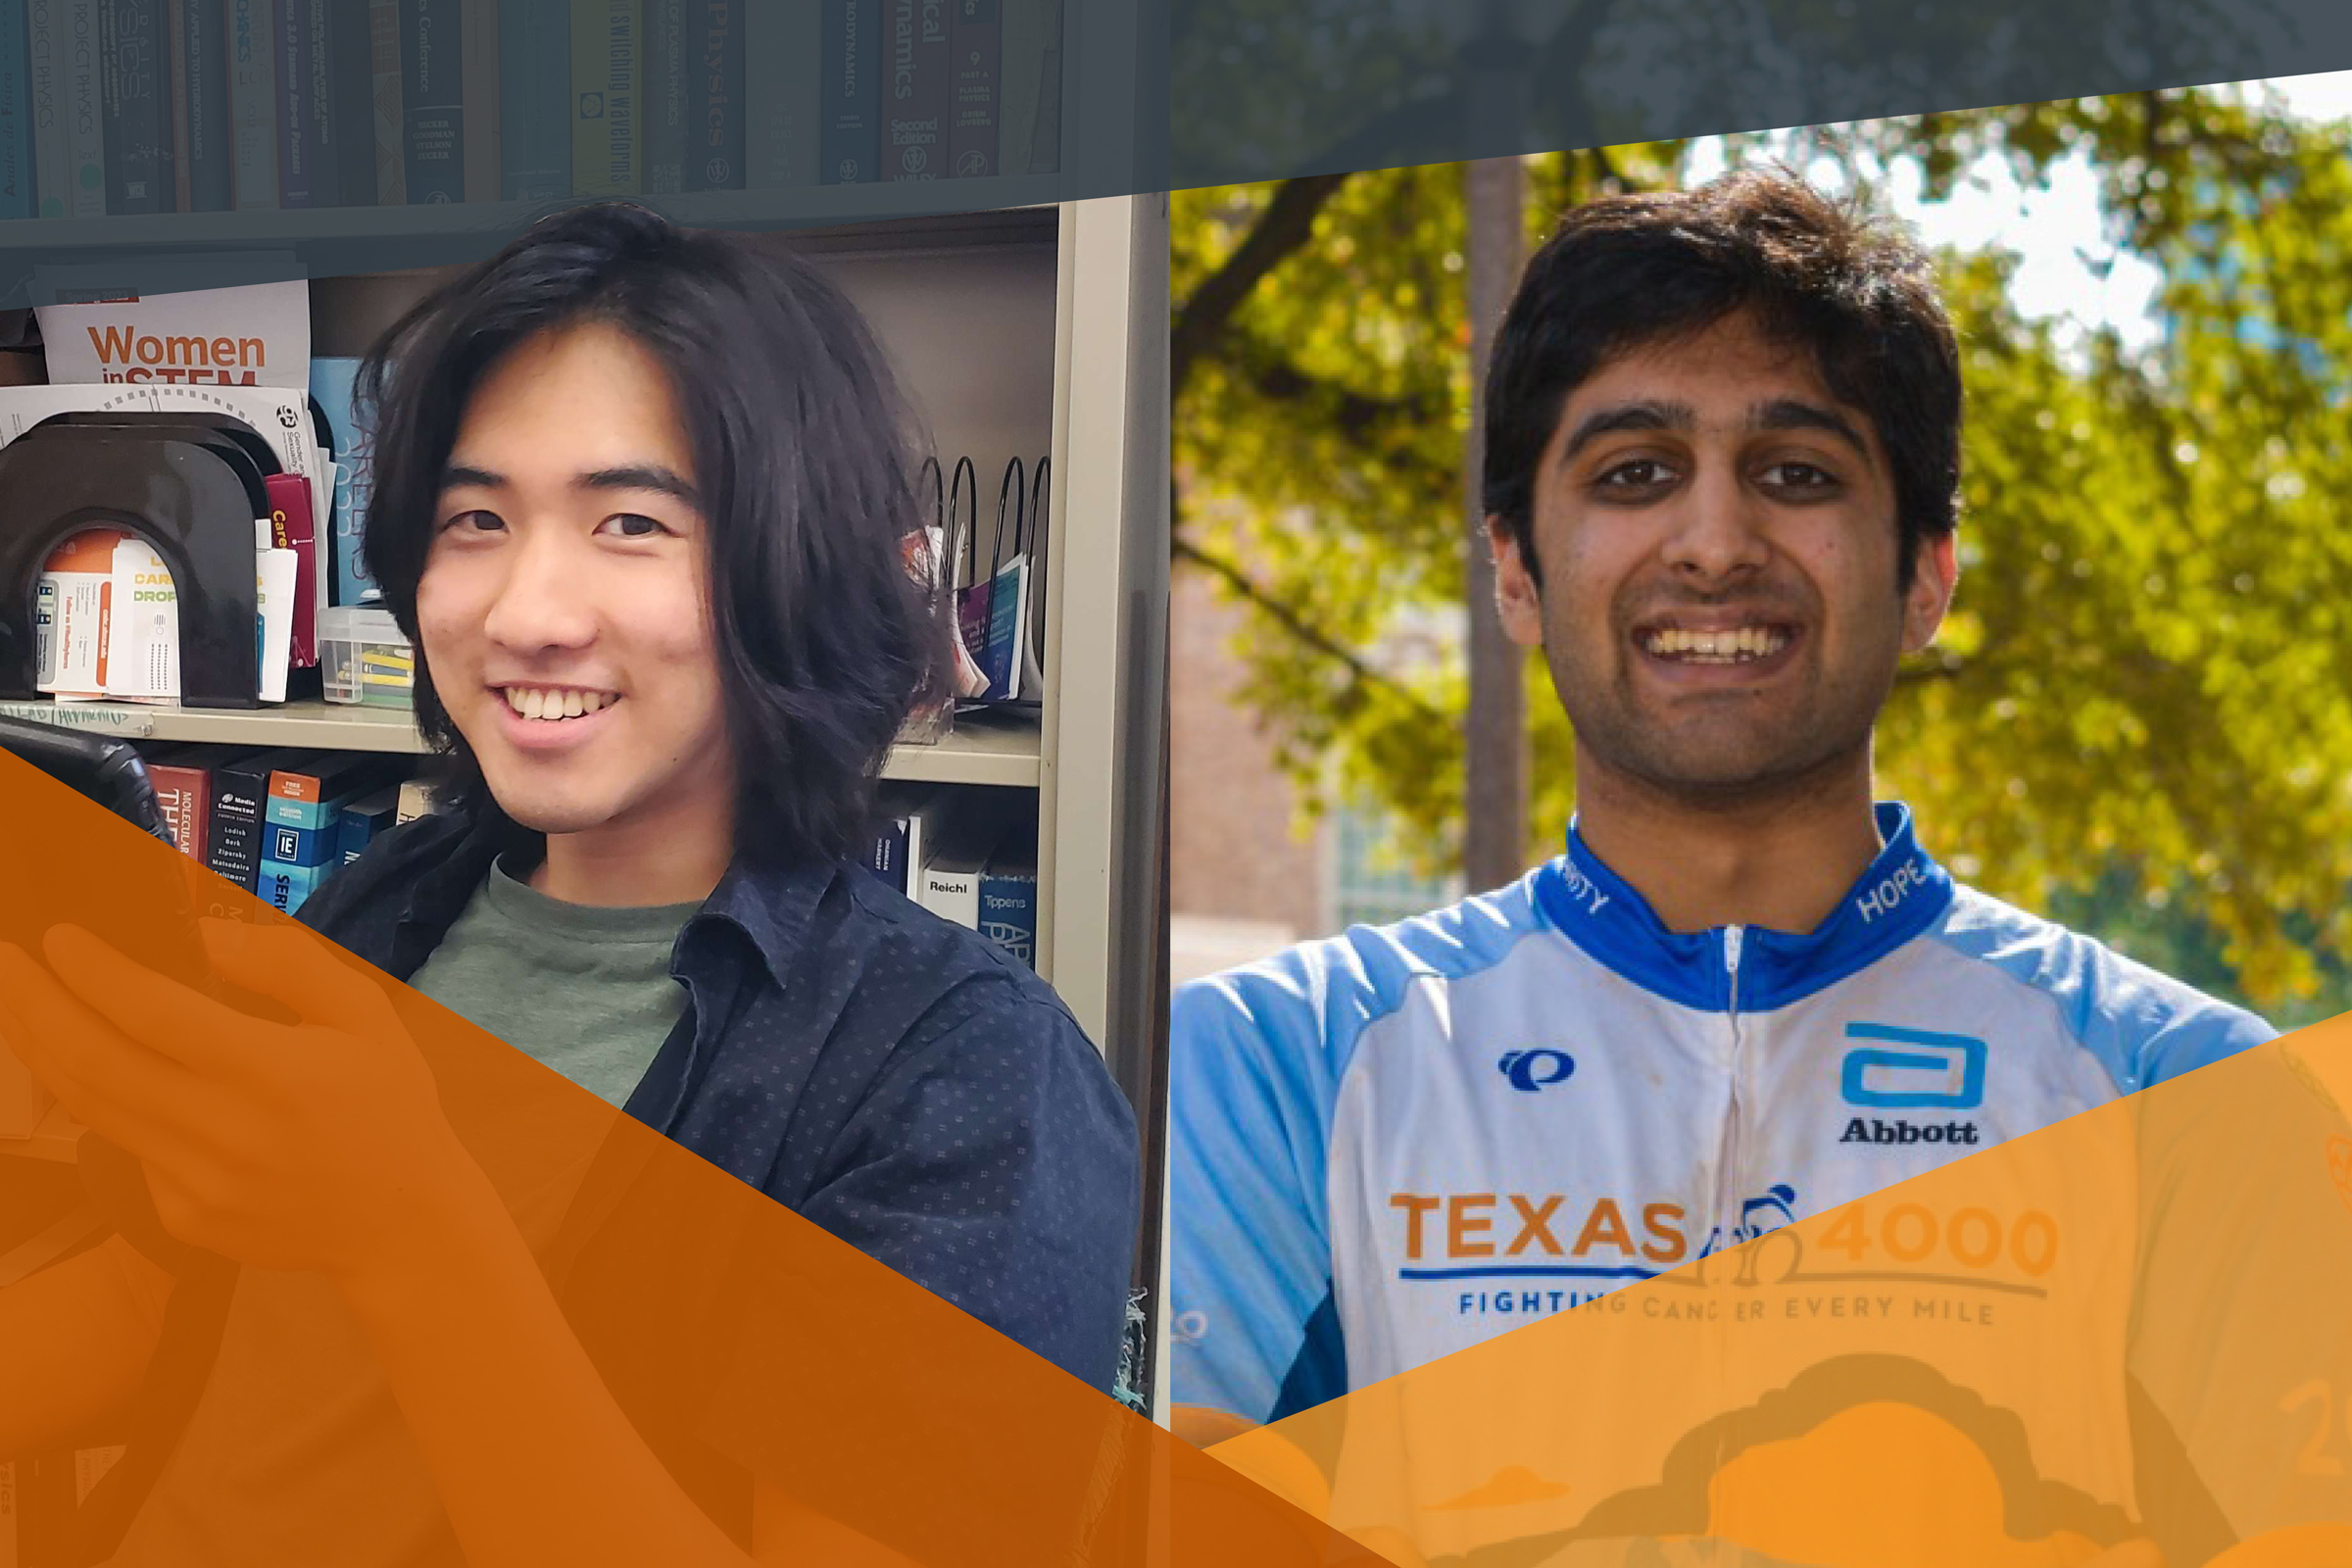 A collage of two students smiling with geometric graphics as an overlay. One student wears a jacket and stands in front of a bookshelf. The other wears Texas 4000 bicyclist gear outside.